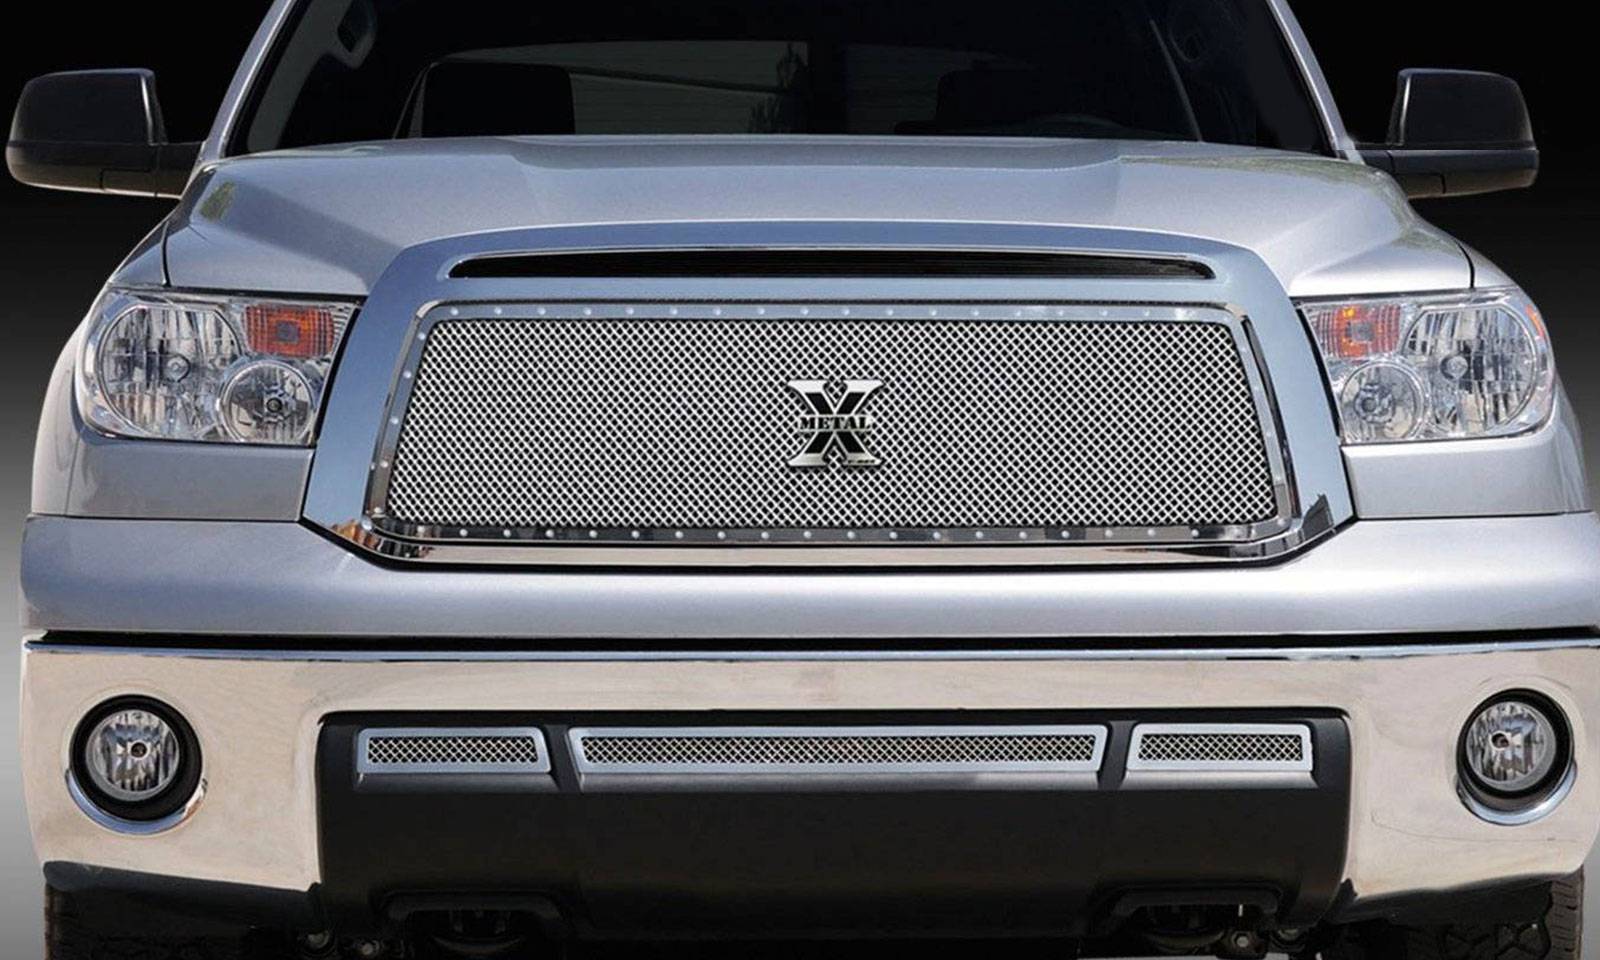 T-REX Grilles - 2010-2013 Tundra X-Metal Grille, Polished, 1 Pc, Insert, Chrome Studs - Part # 6719630